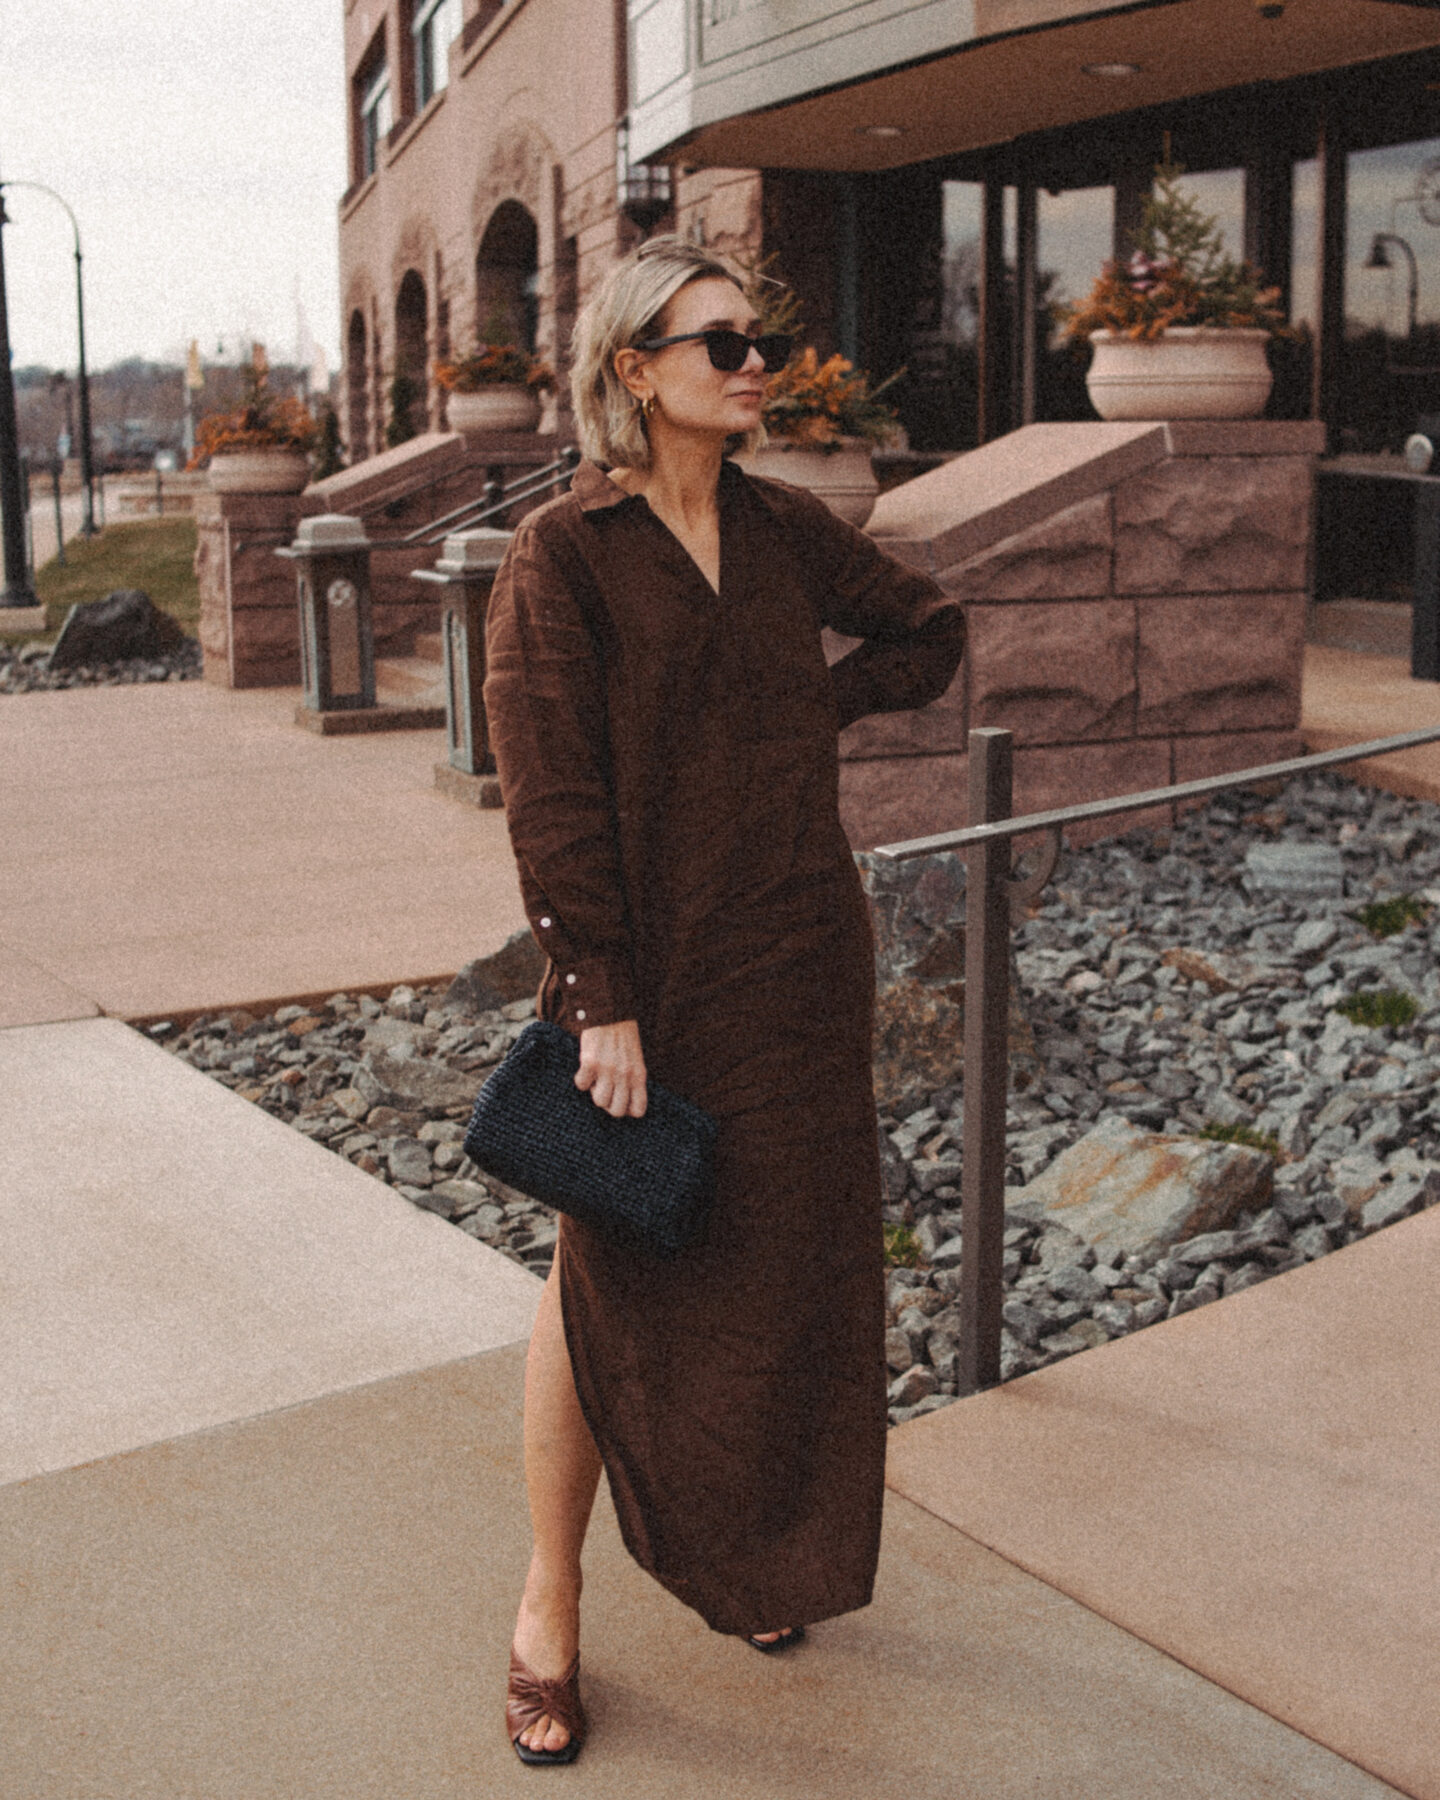 Karin Emily wears a brown linen maxi dress and brown knot sandal heels in front of a brown rock building